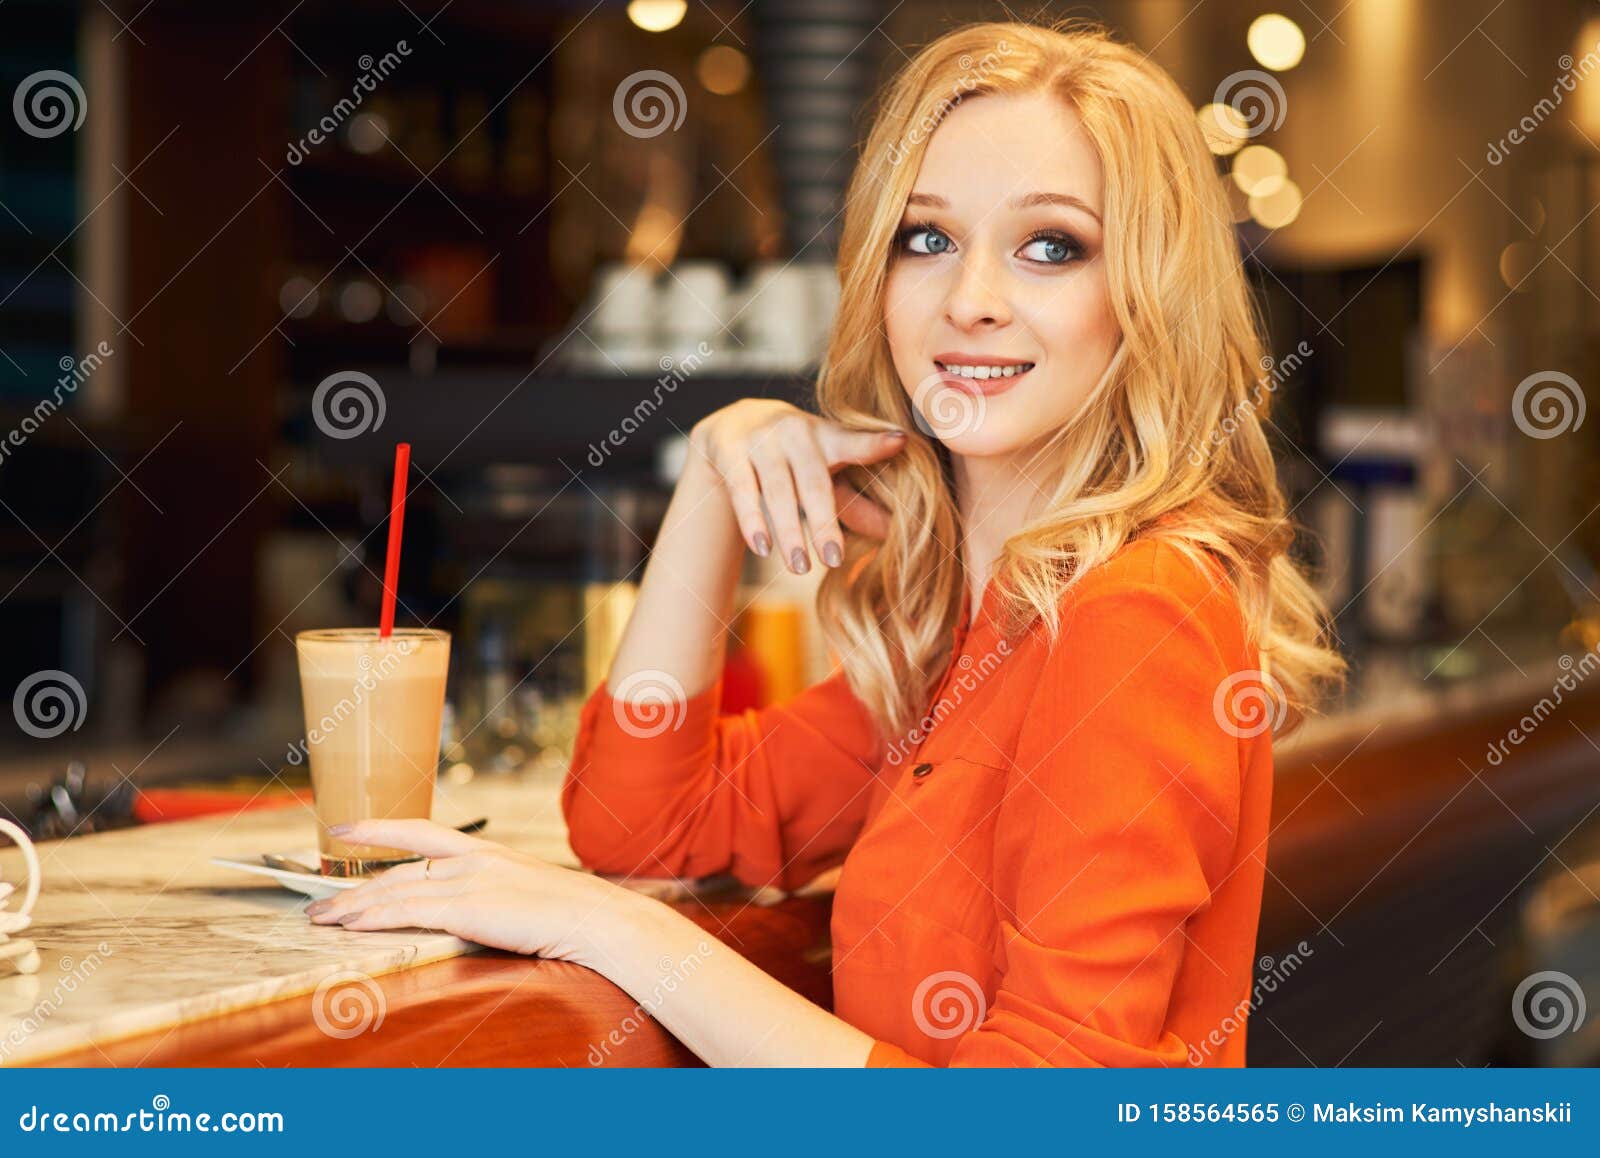 Adult Sitting At Bar Holding A Straw At The Drink Stock Image Image Of Beauty Looking 158564565 